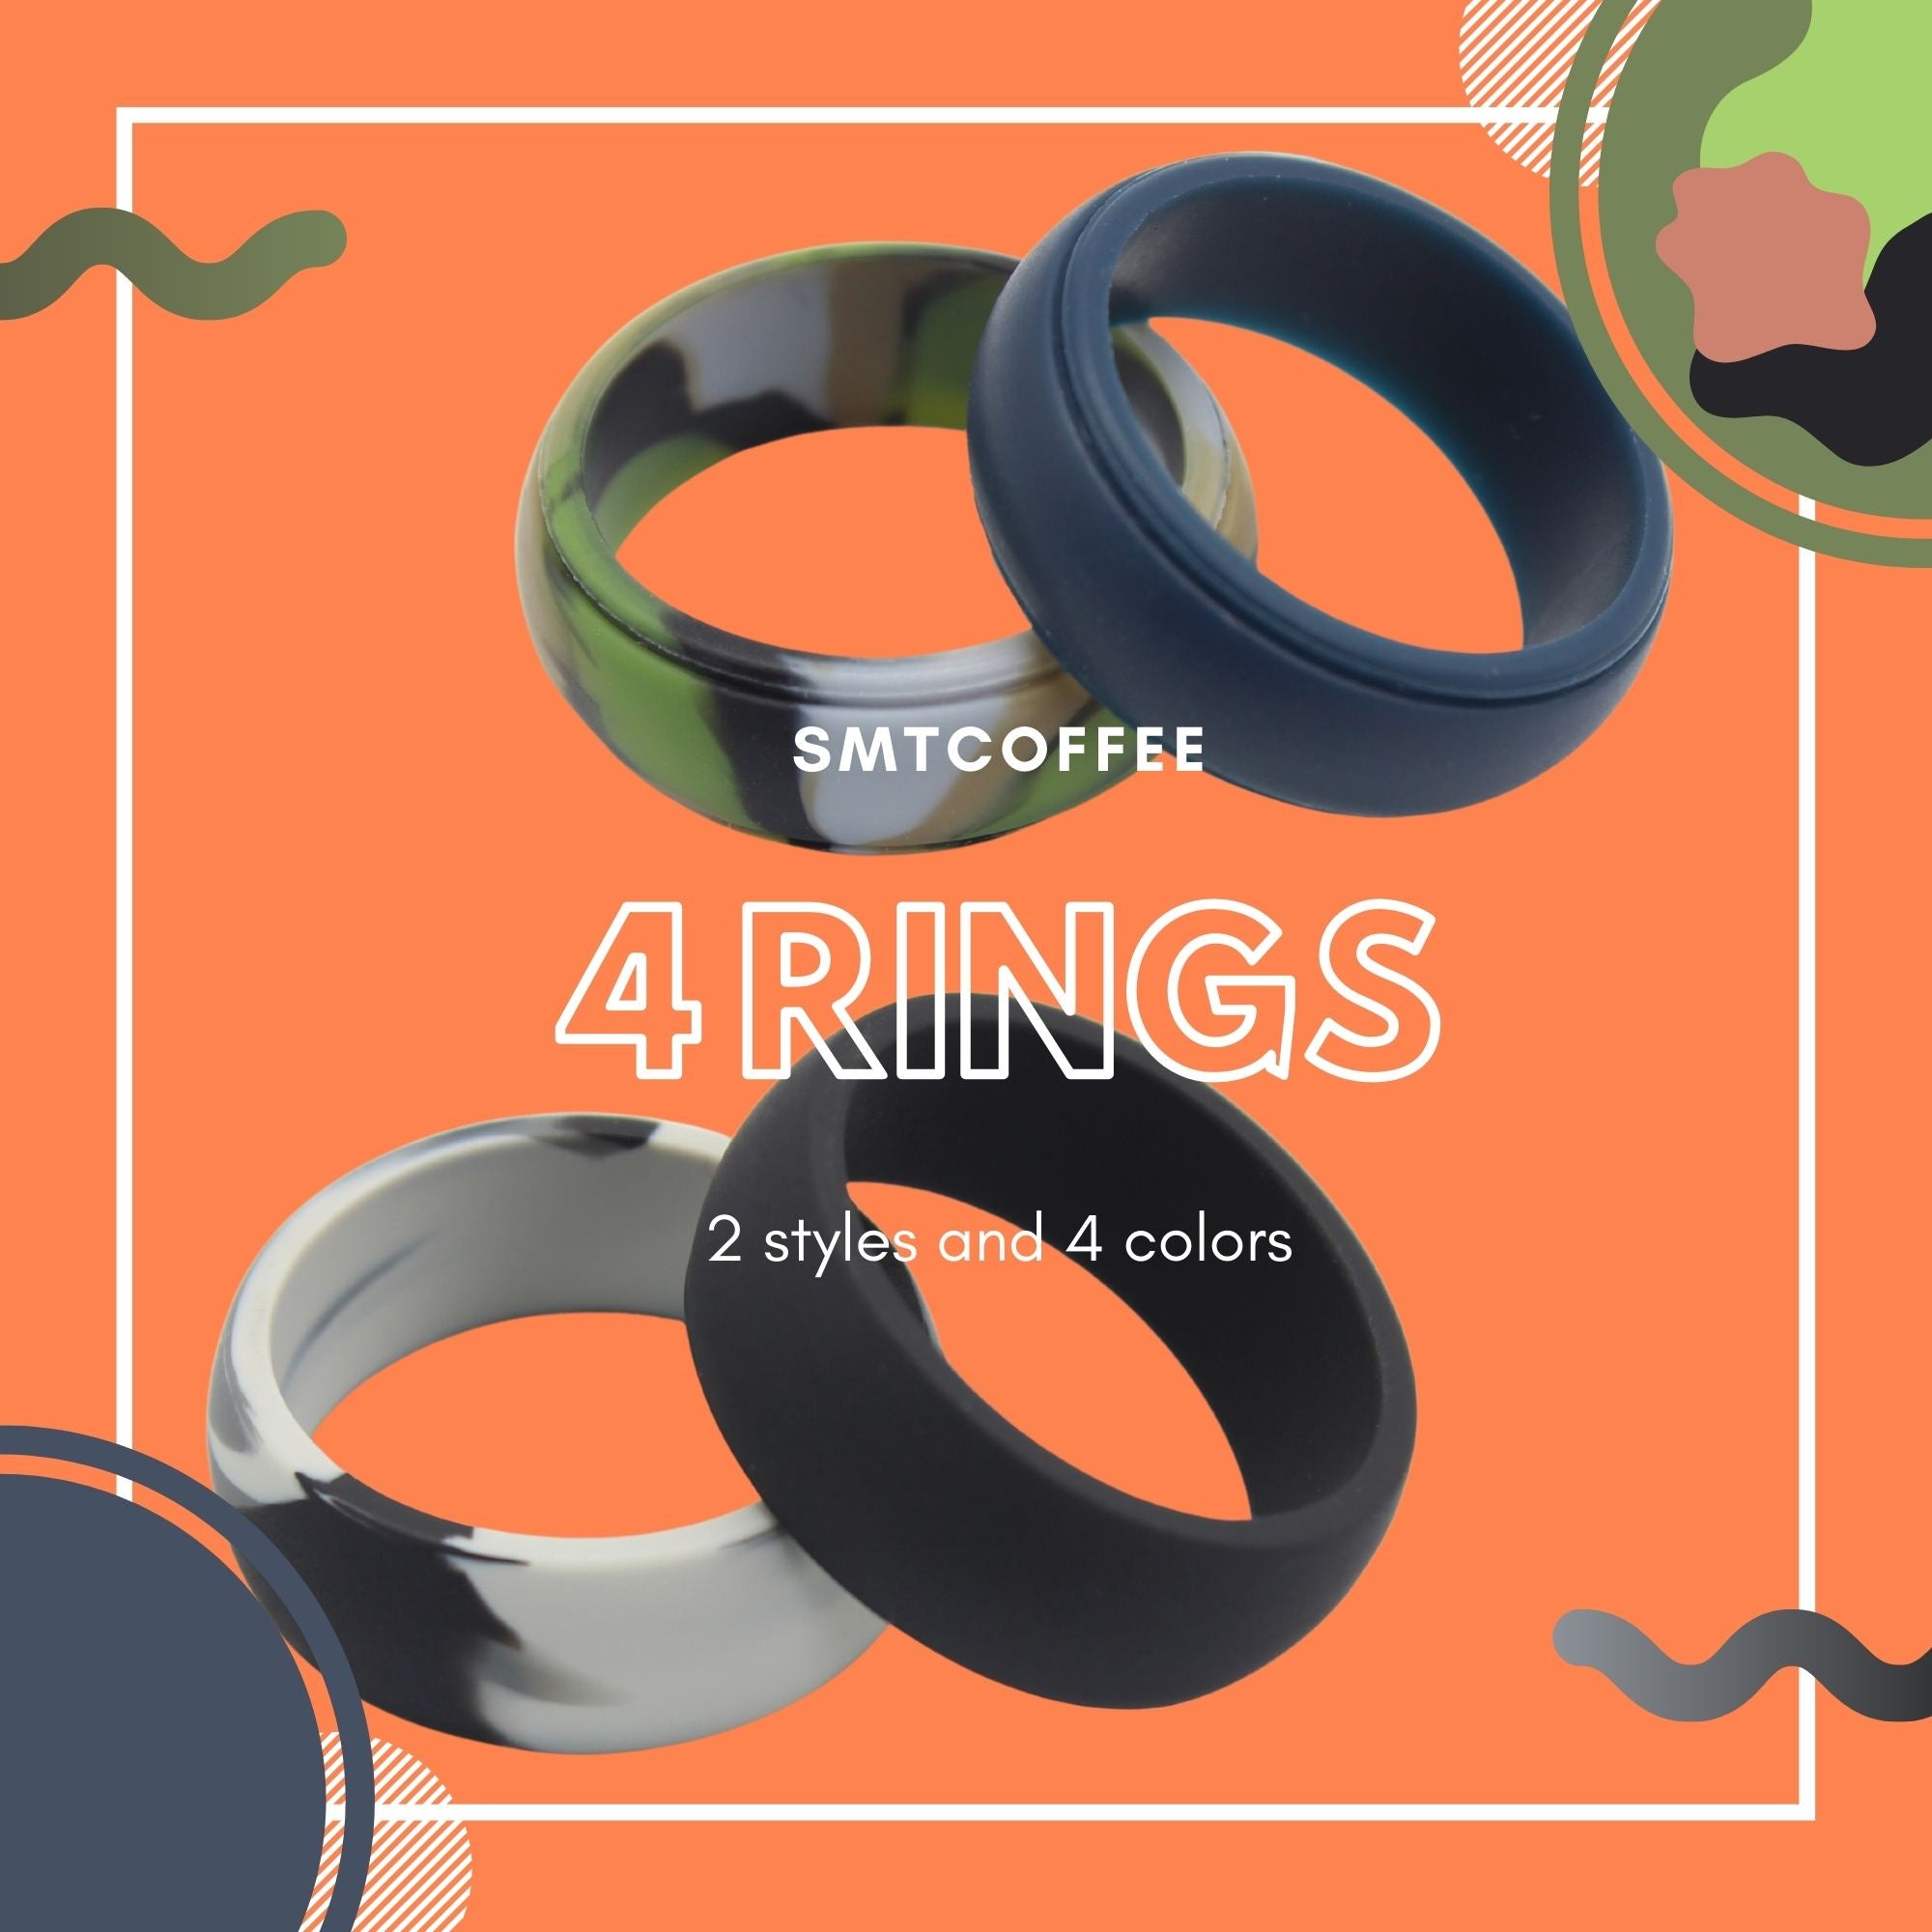 best silicone wedding rings smtcoffee 4 rings 2 styles and 4 colors